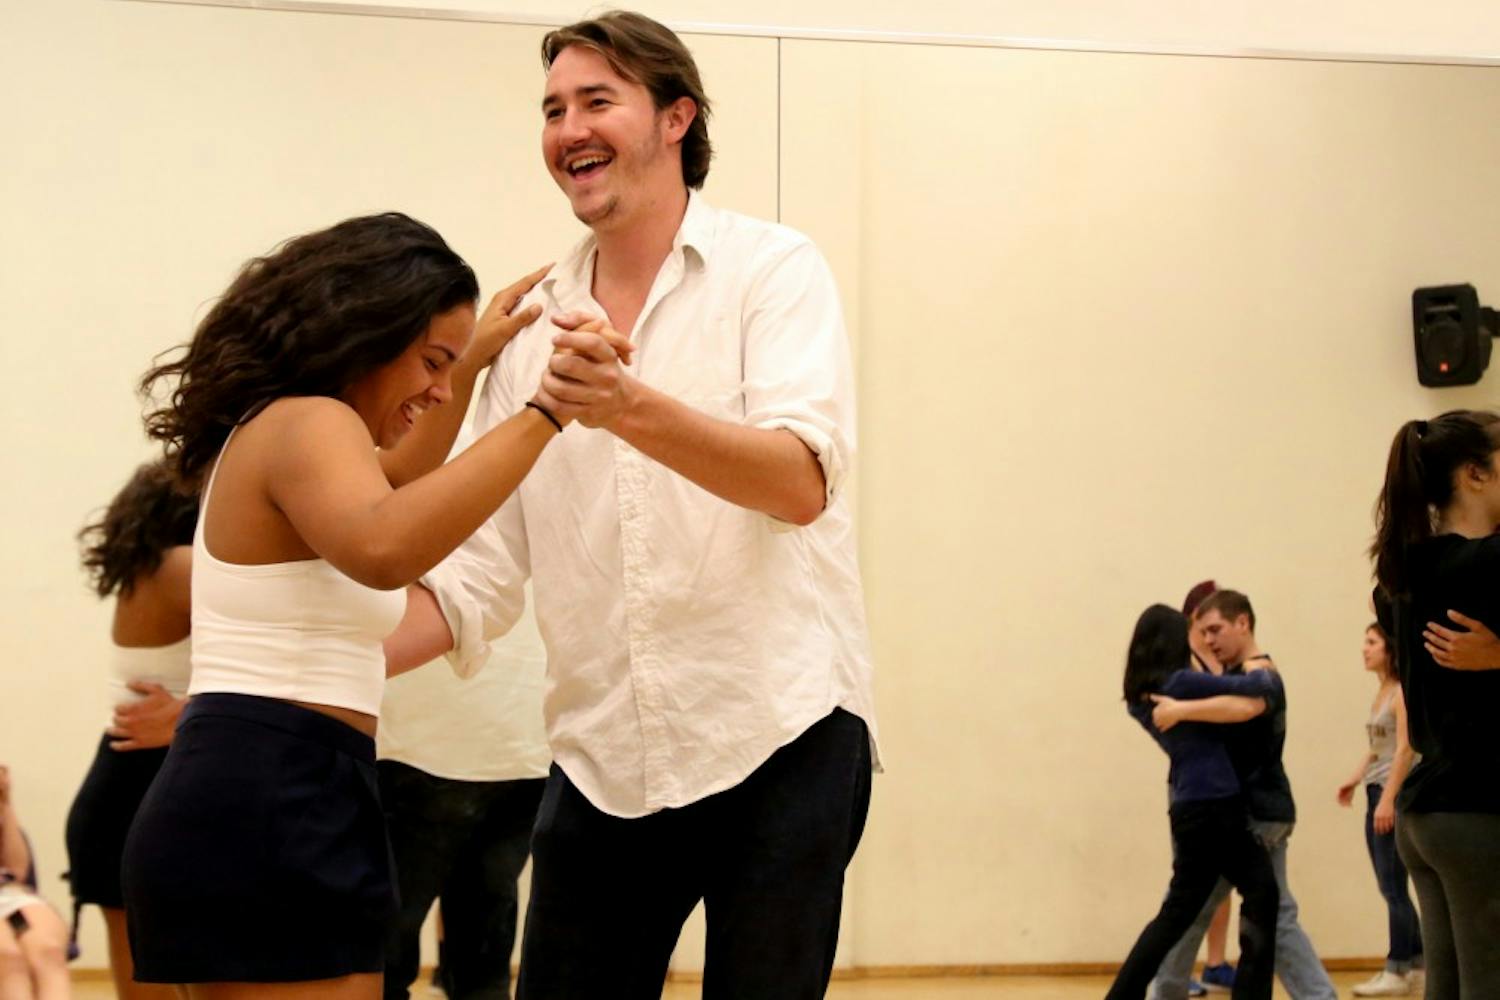 Aerospace major Adrianna Conway, left, and Geoffrey Swanon, right, dance in Larry Caves' Lating/Swing/Ballroom I class on Tuesday, March 15, 2016, in the ASU Media and Performing Arts building on the Tempe campus. 